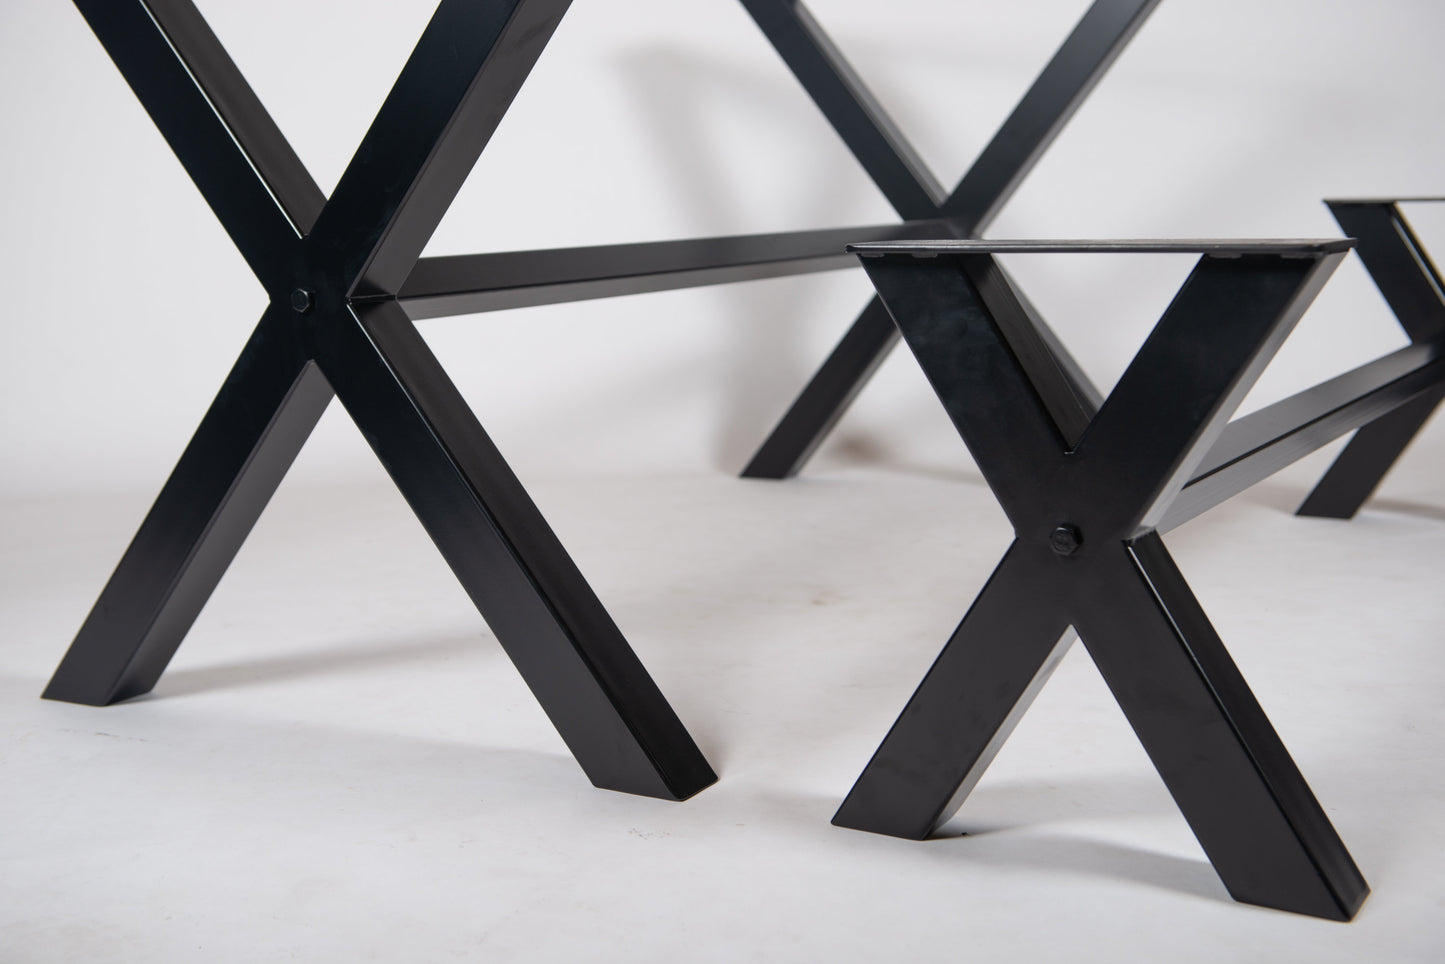 The 'X' Table and Bench Base (Set)